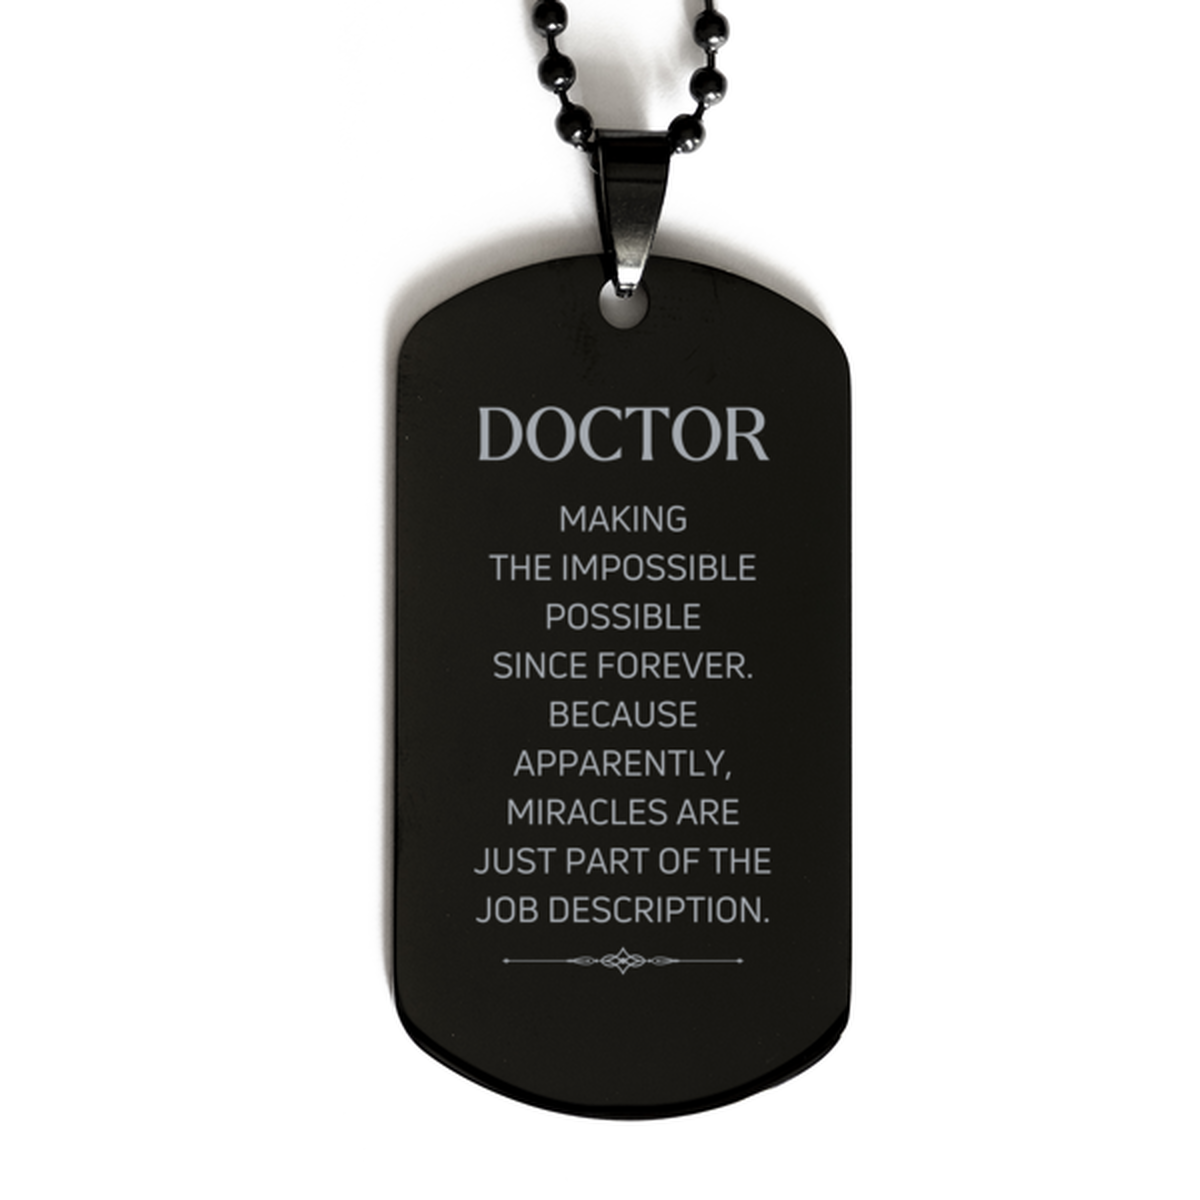 Funny Doctor Gifts, Miracles are just part of the job description, Inspirational Birthday Black Dog Tag For Doctor, Men, Women, Coworkers, Friends, Boss